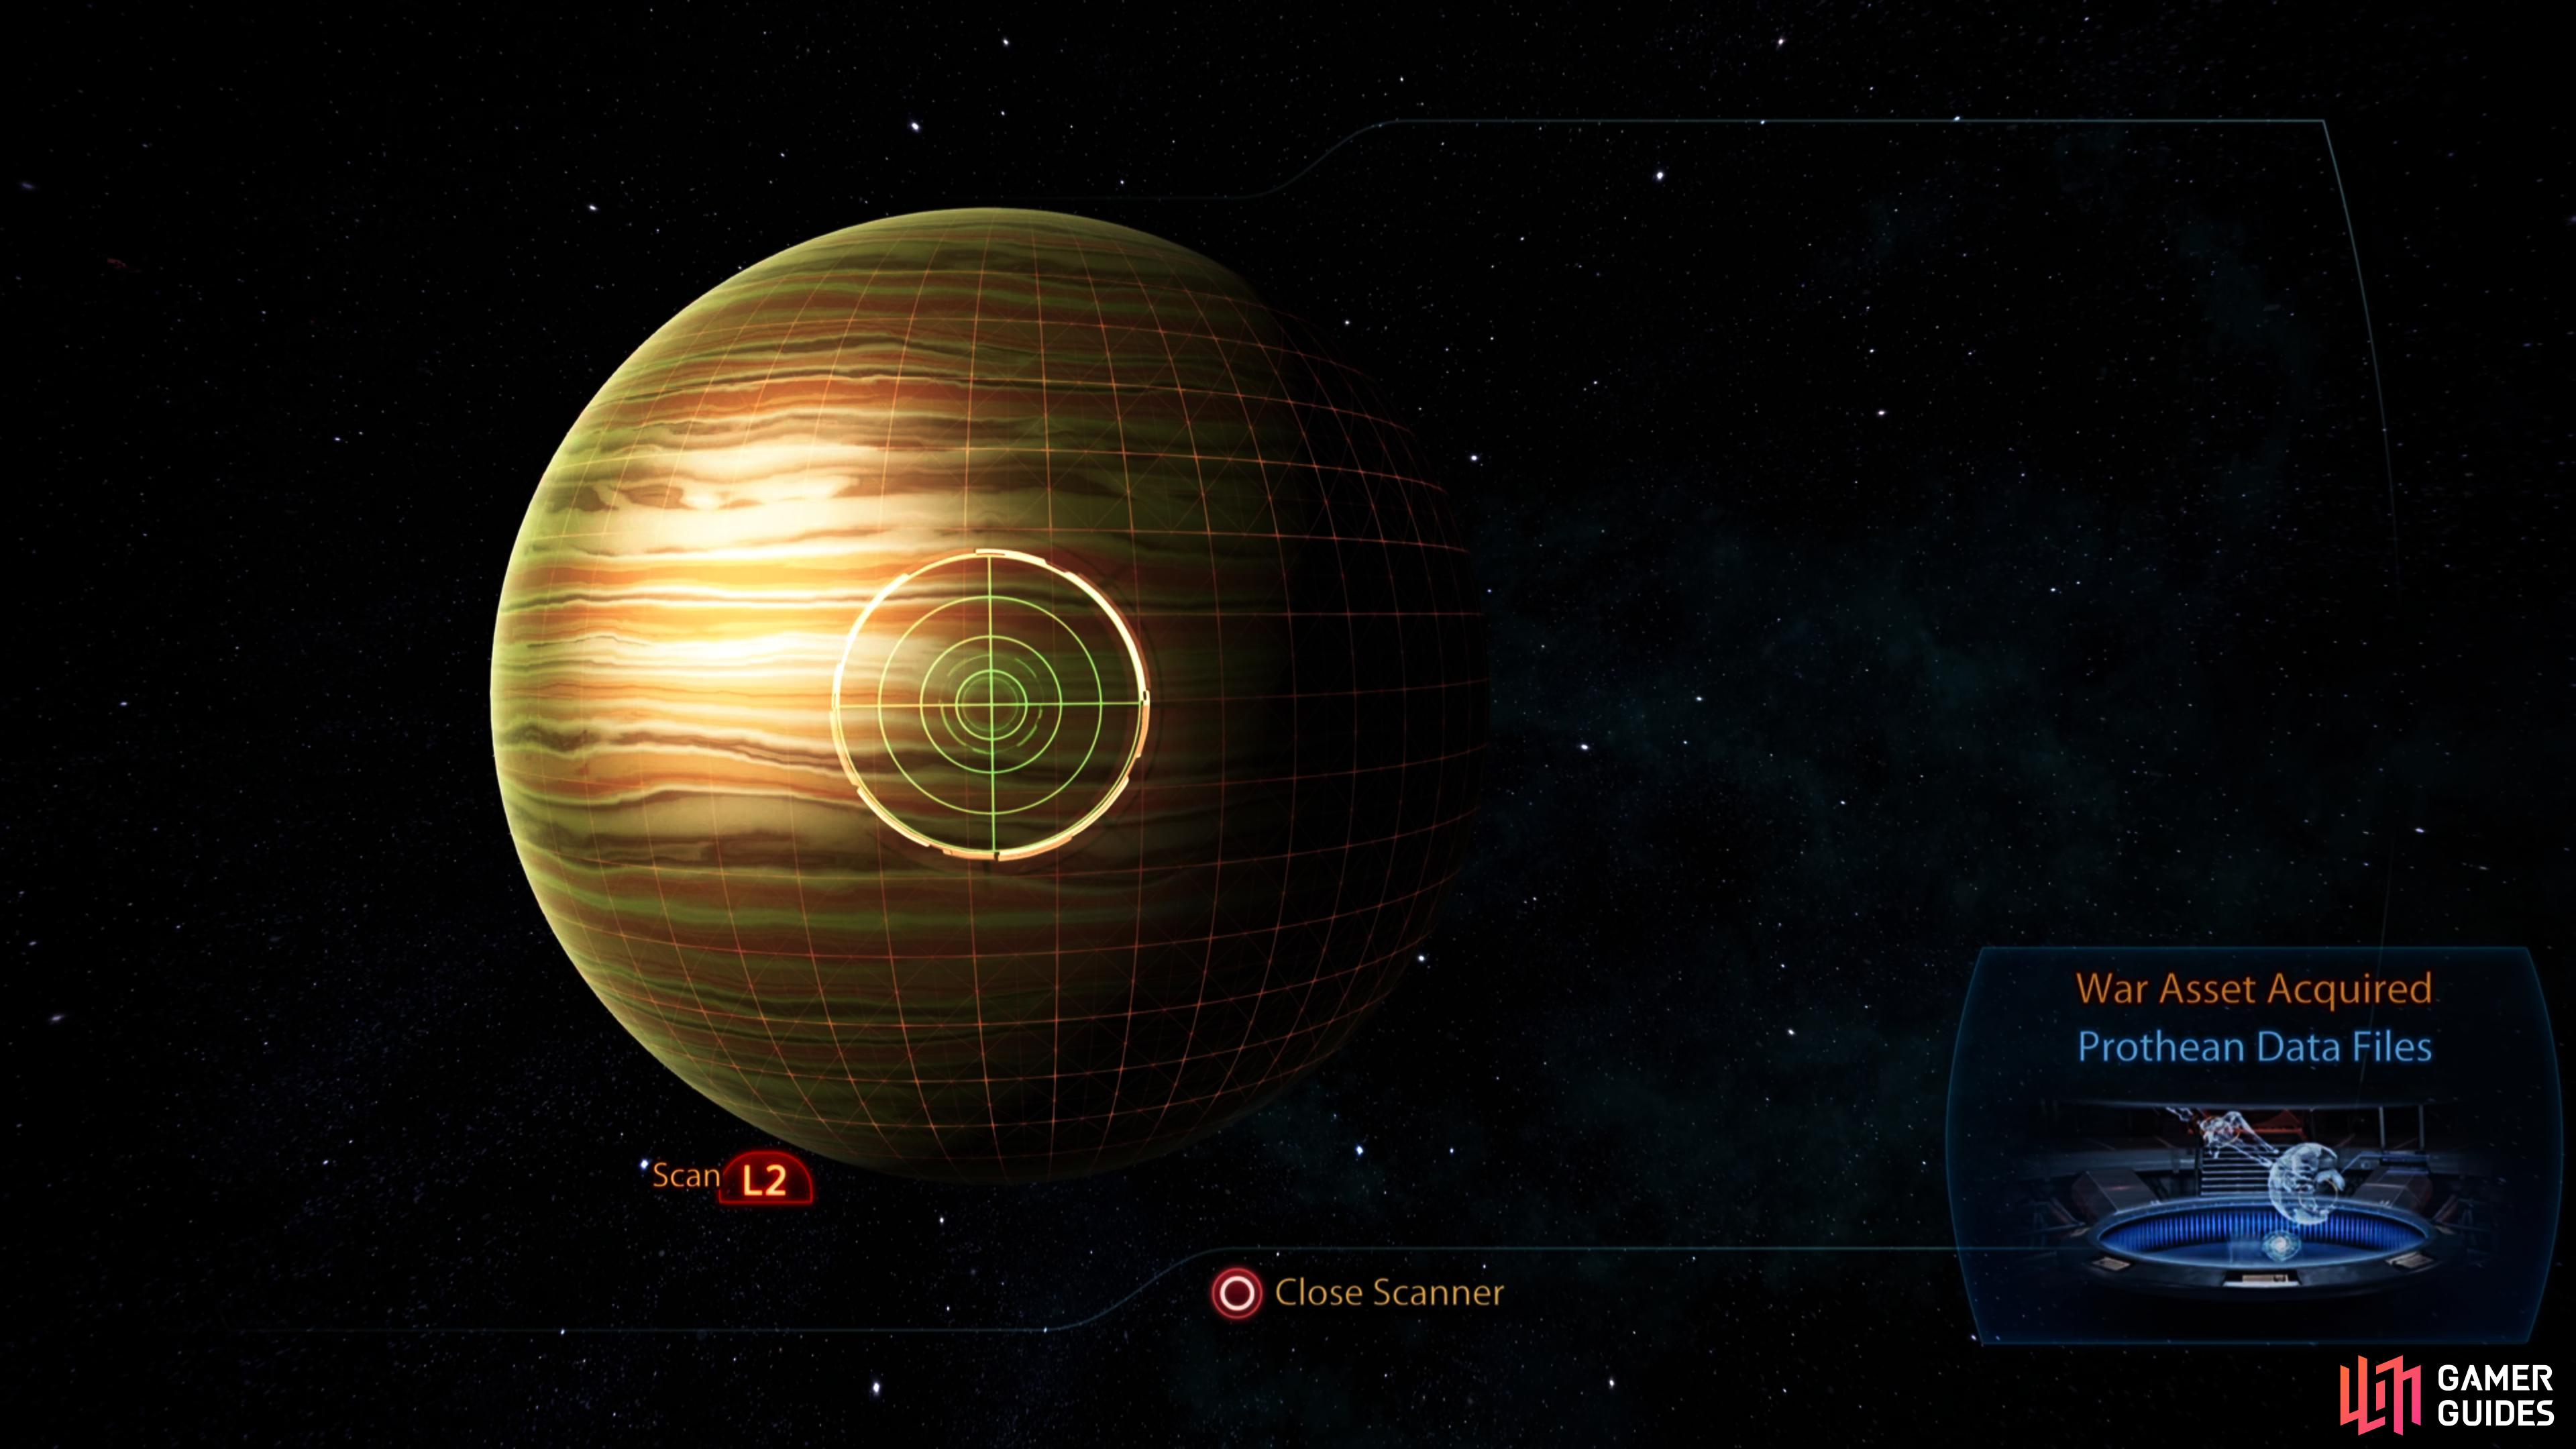 Scan the planet Zion to find the Prothean Data Files war asset.